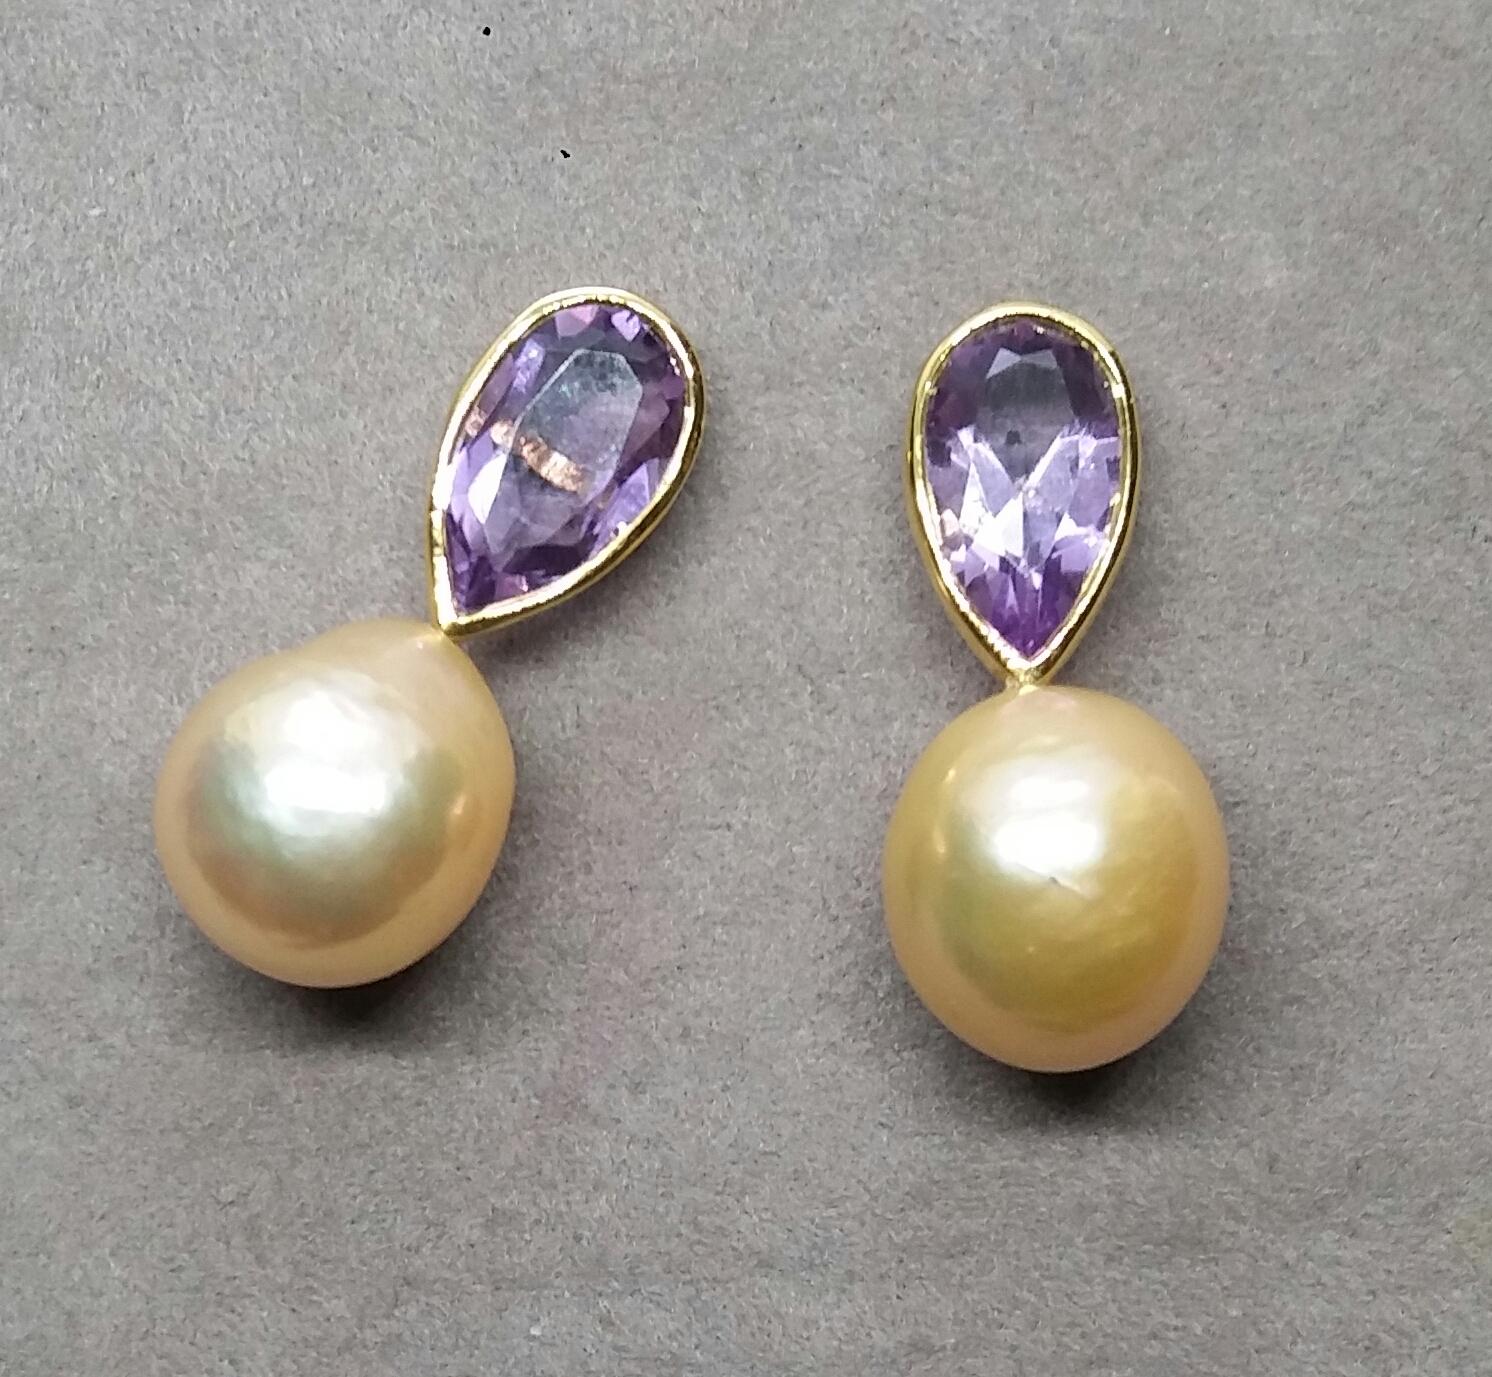  These simple but elegant and completely handmade earrings have 2 faceted Pear Shape Natural Amethysts measuring 7x12 mm set in yellow gold bezel at the top to which are suspended 2  Natural Cream Color Baroque Pearls measuring 11 x 13 mm.

In 1978